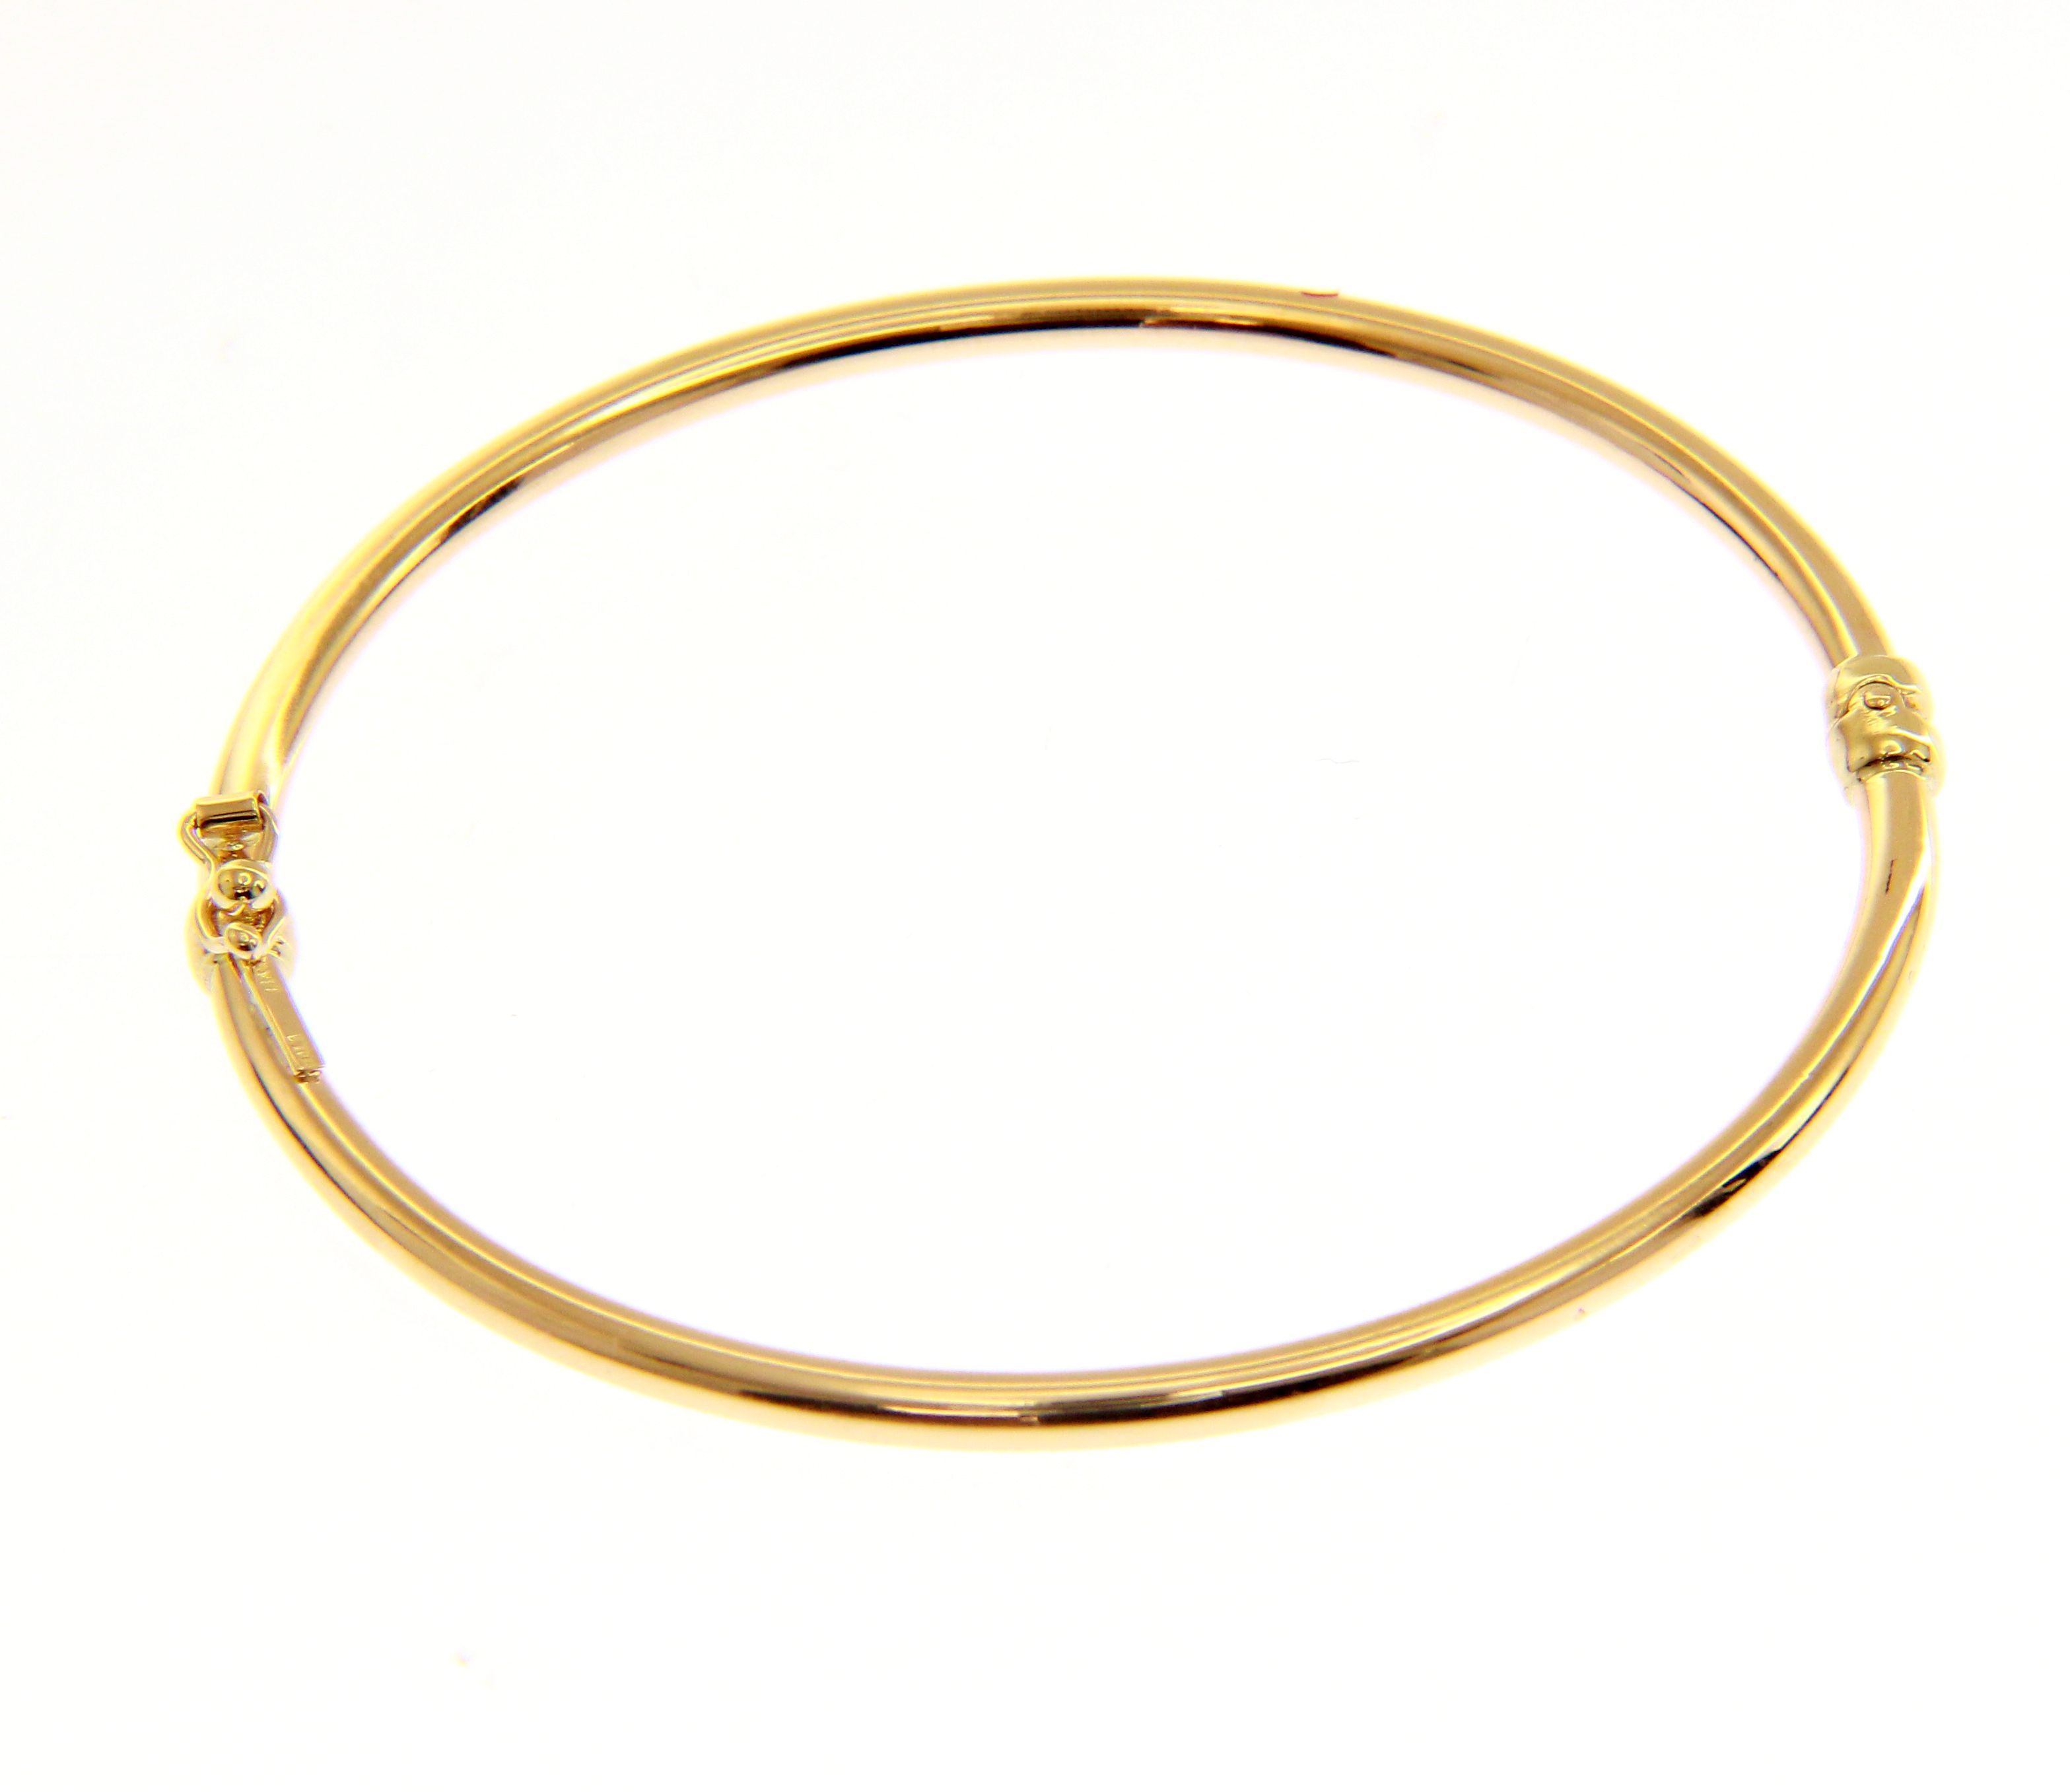 Golden oval bracelet with clasp k14 (code S205137)